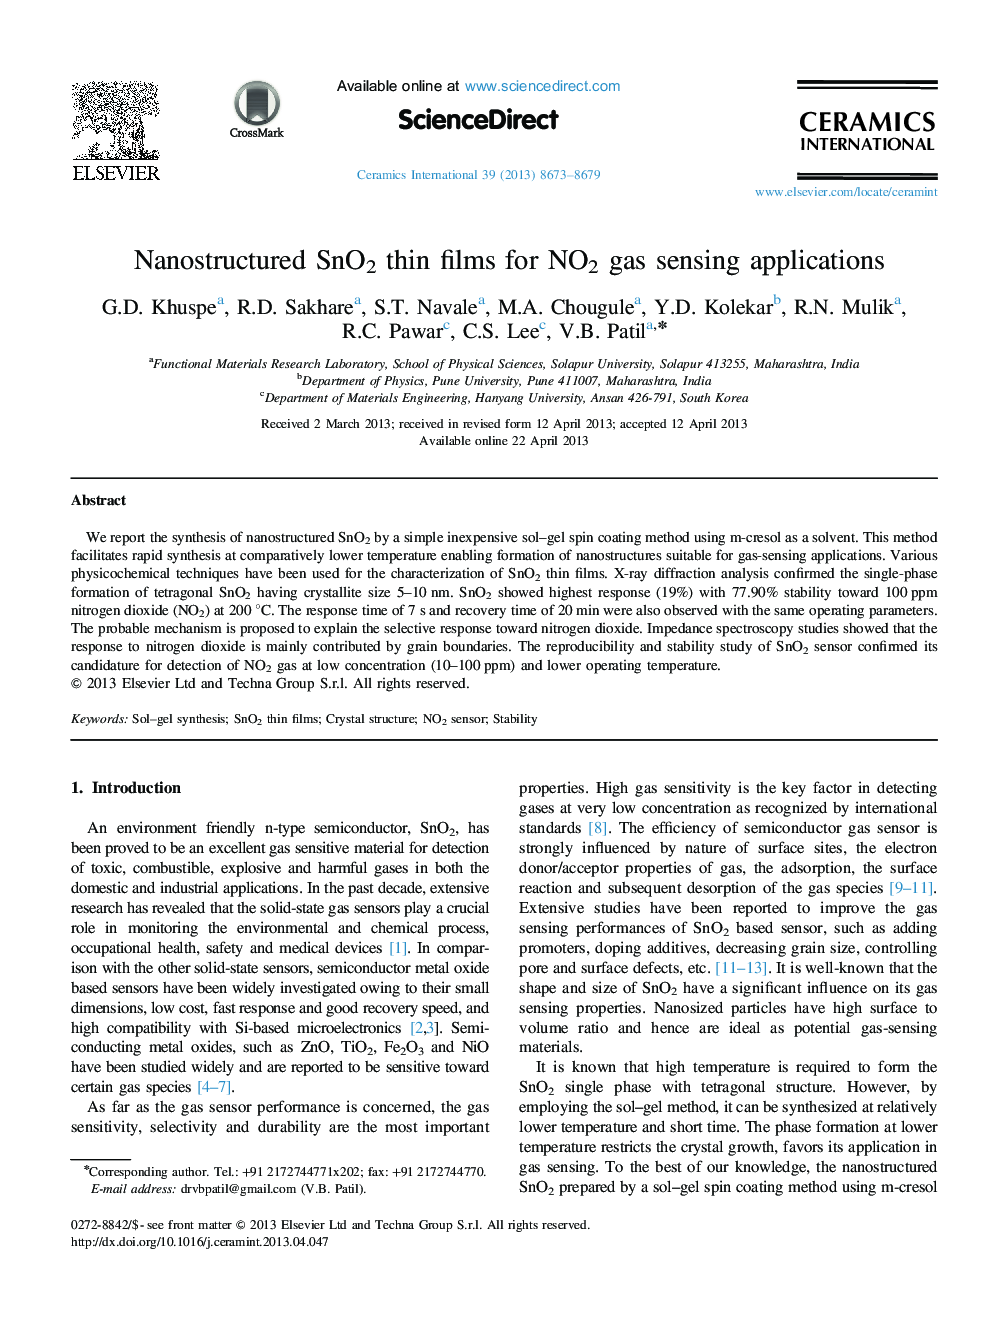 Nanostructured SnO2 thin films for NO2 gas sensing applications